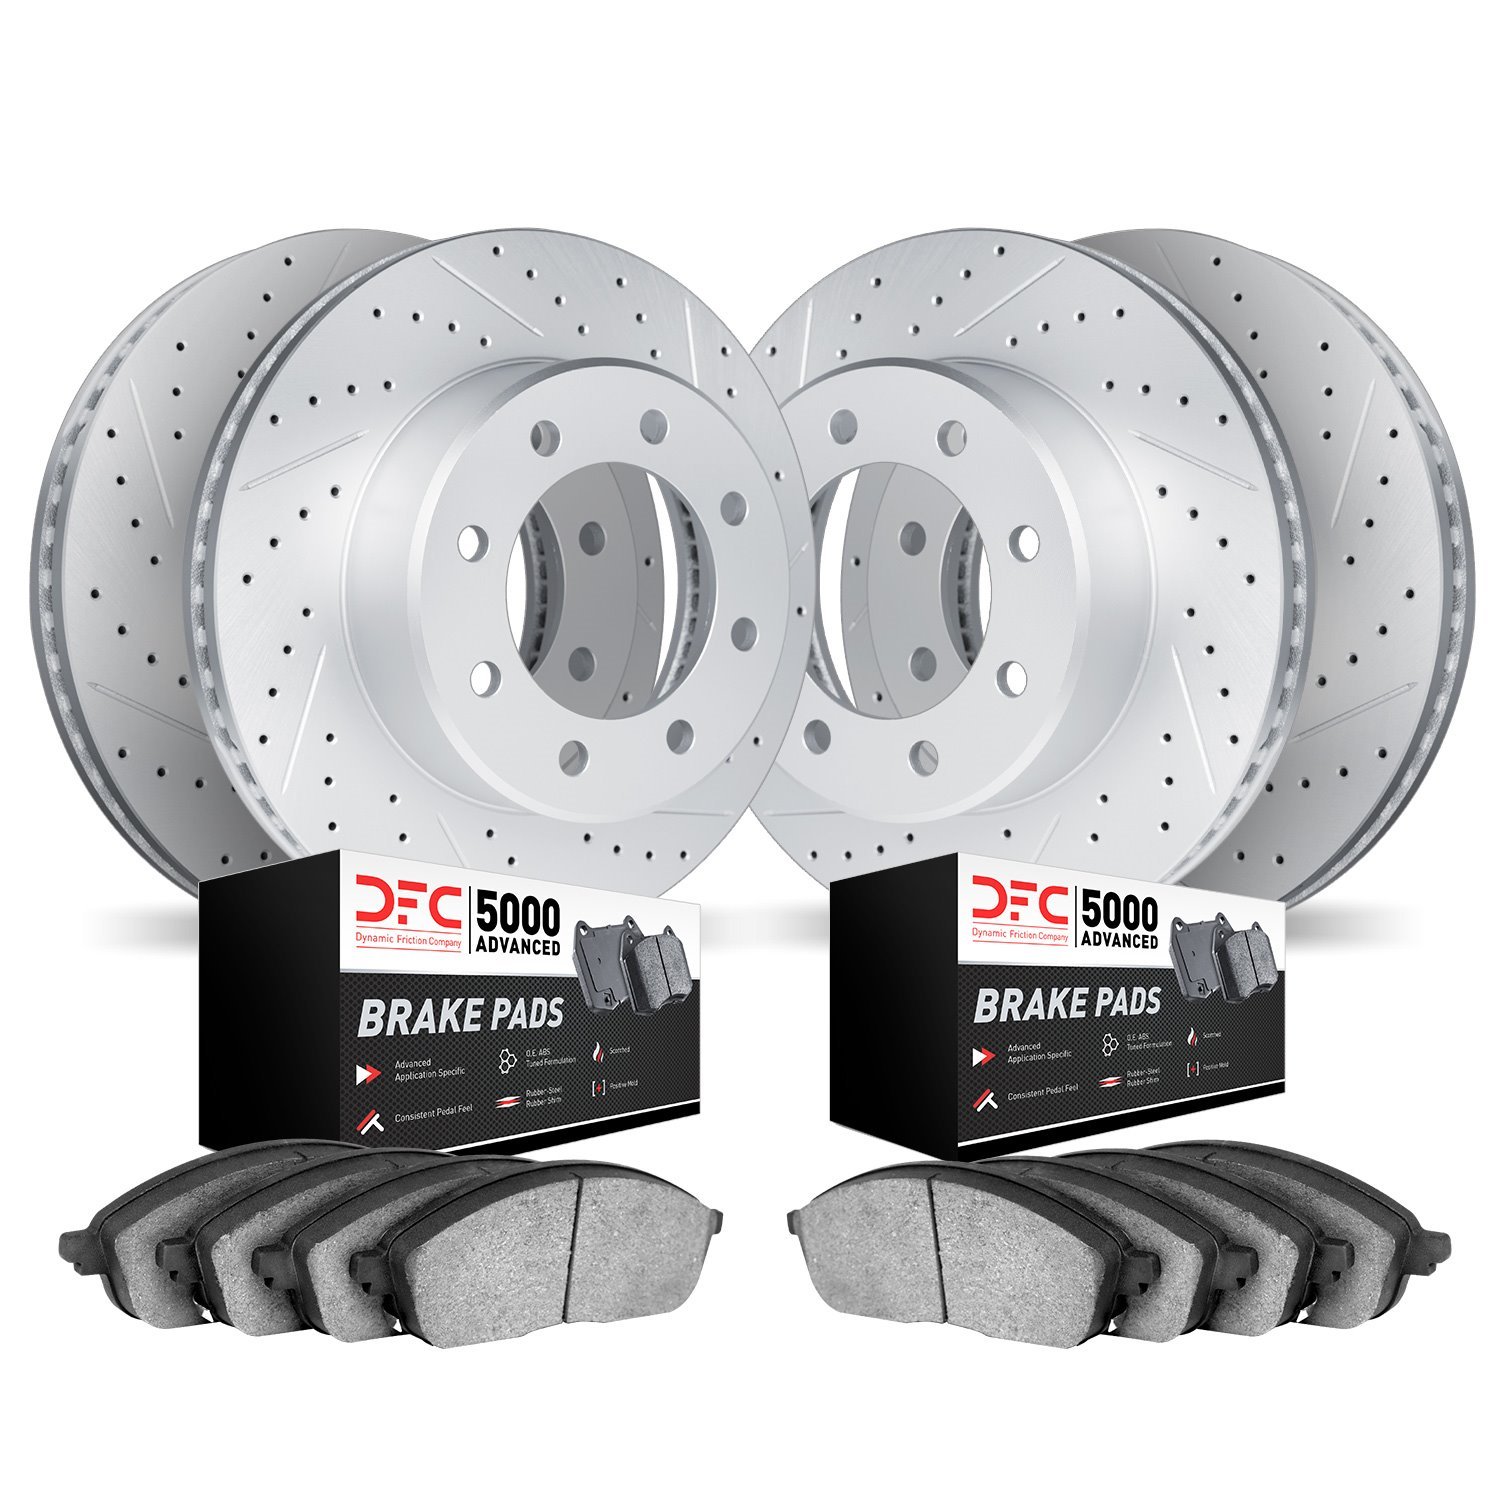 2504-54228 Geoperformance Drilled/Slotted Rotors w/5000 Advanced Brake Pads Kit, 1999-2000 Ford/Lincoln/Mercury/Mazda, Position: